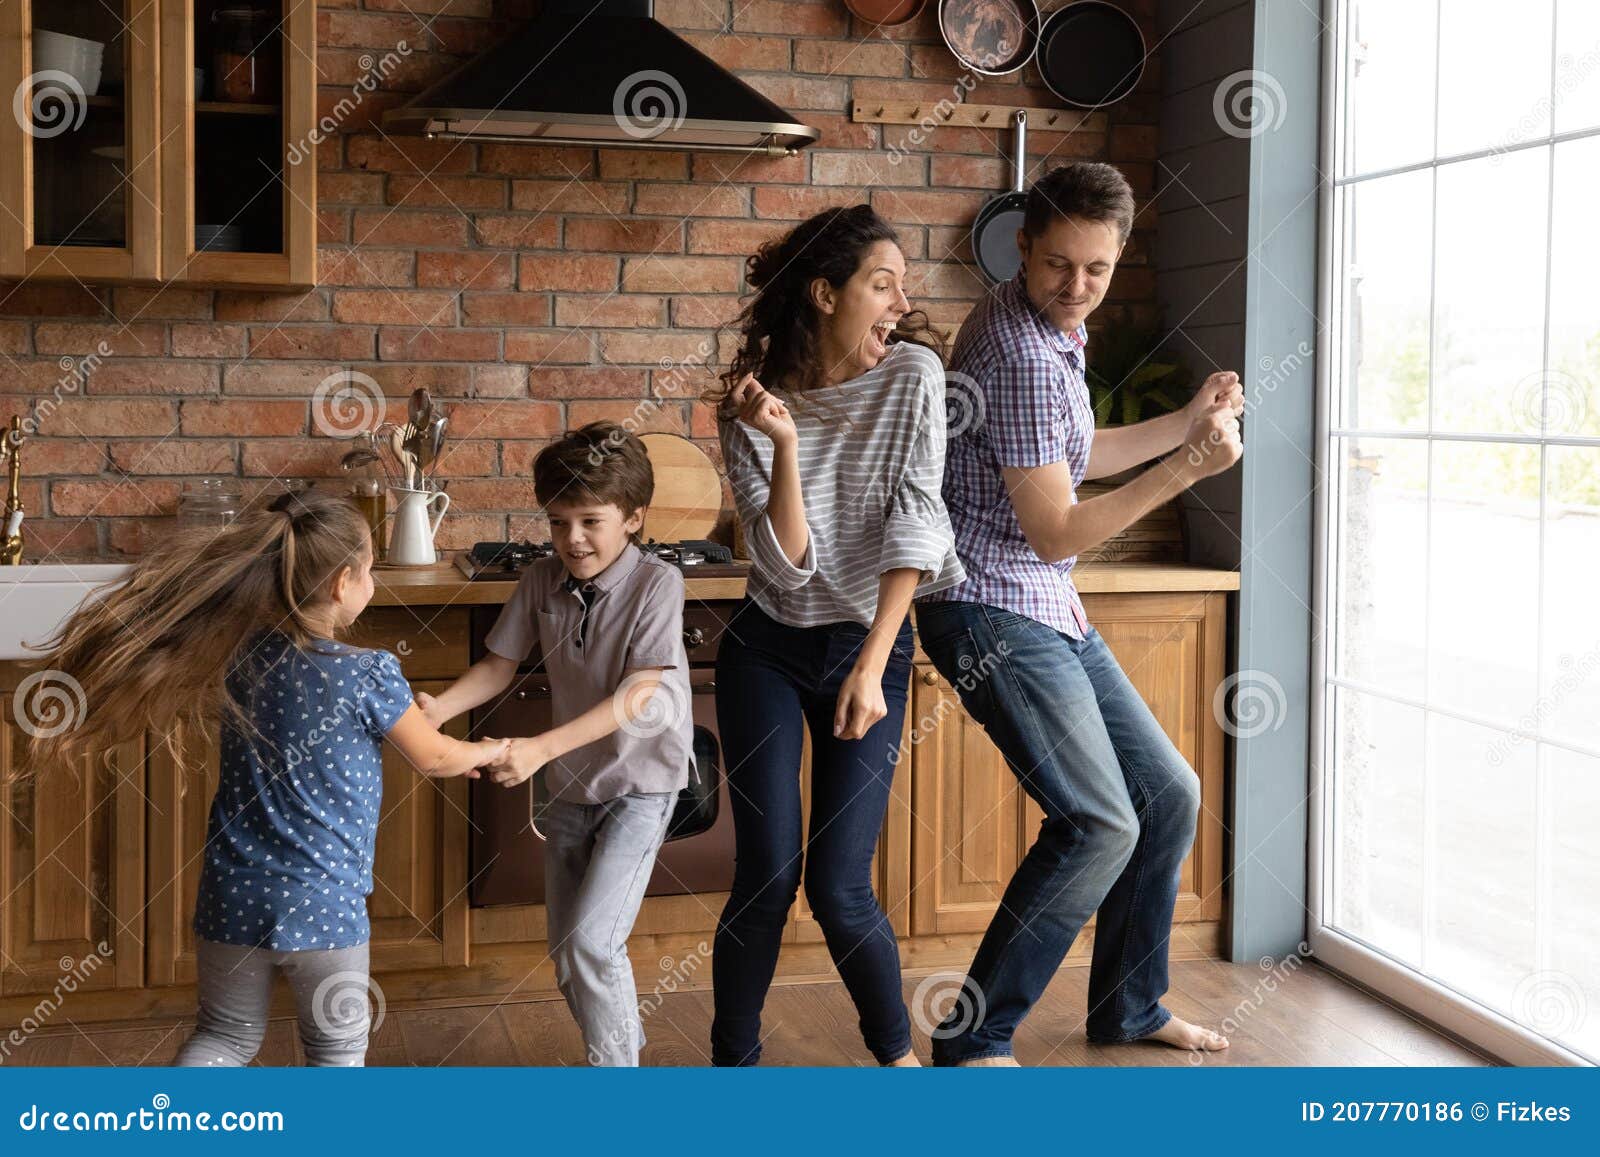 overjoyed young family with kids dance in kitchen